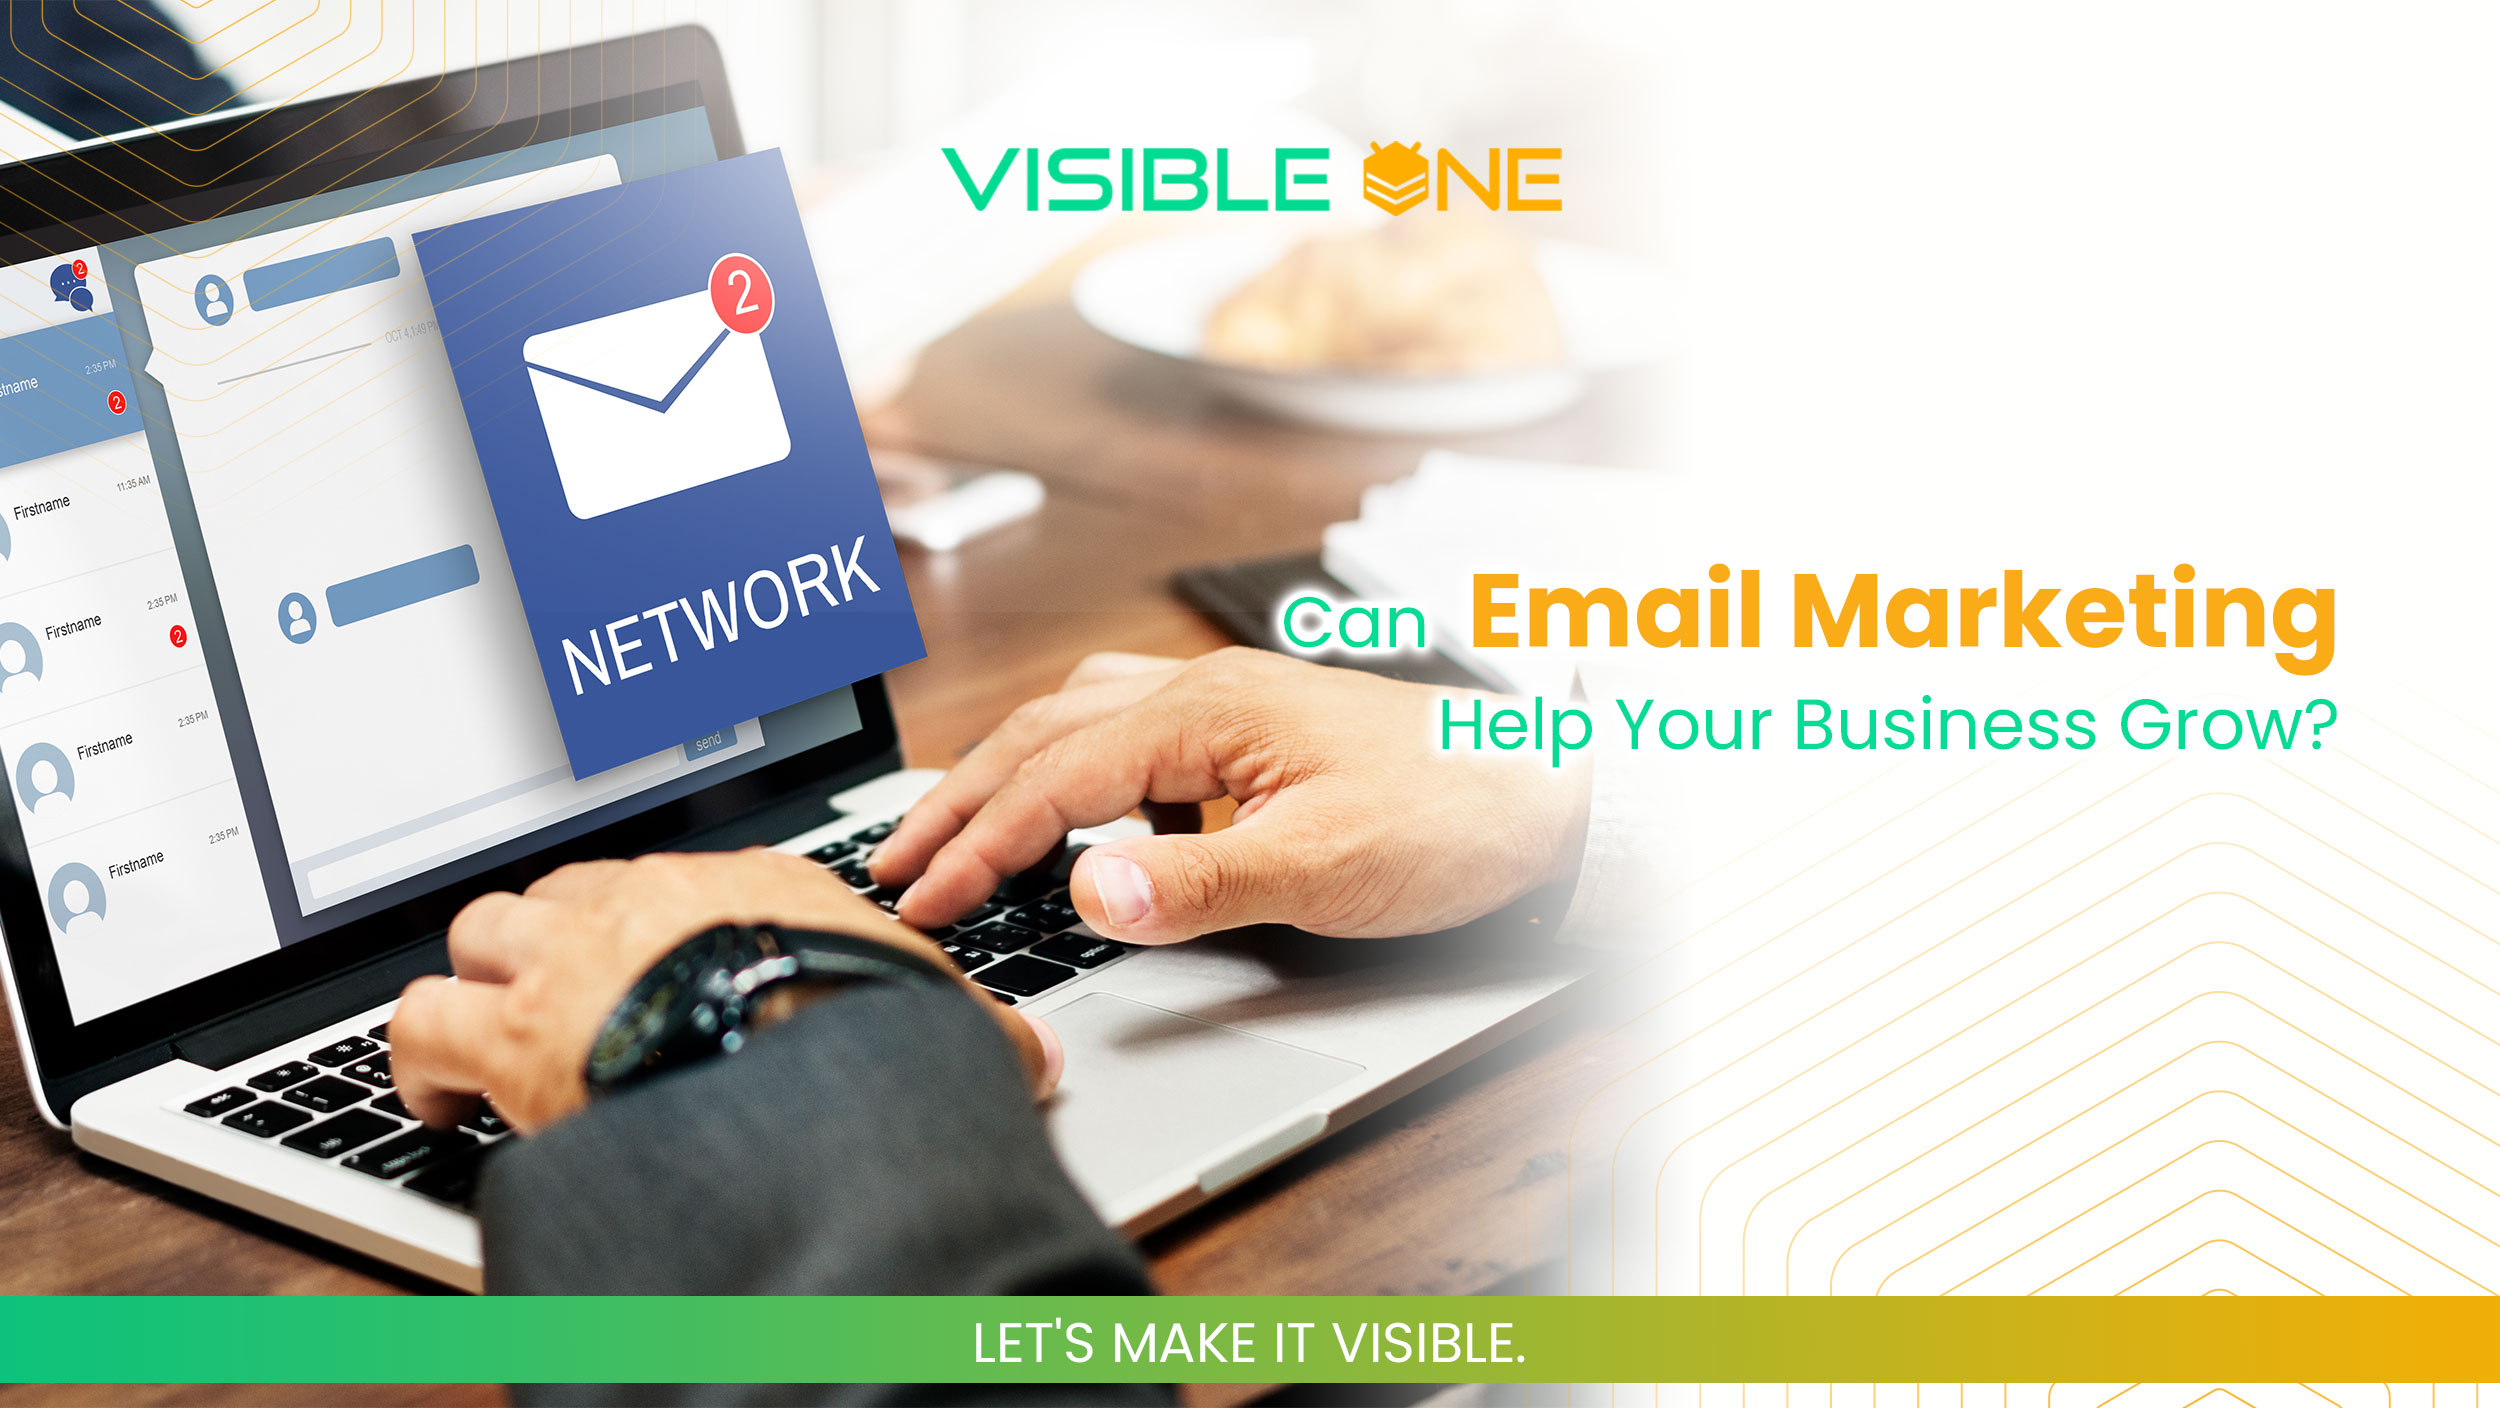 Can Email Marketing Help Your Business Grow?